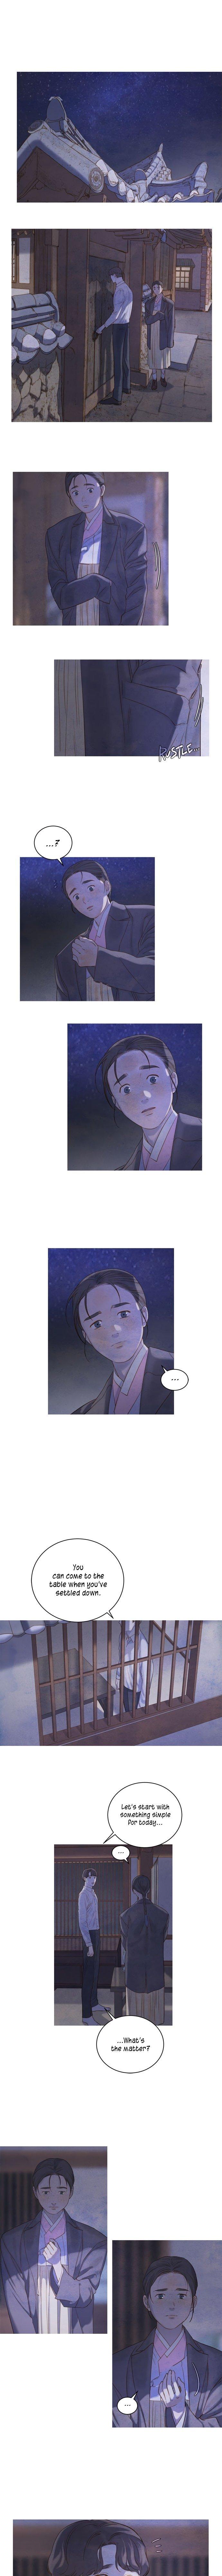 The Whale Star - The Gyeongseong Mermaid - Chapter 31 Page 8